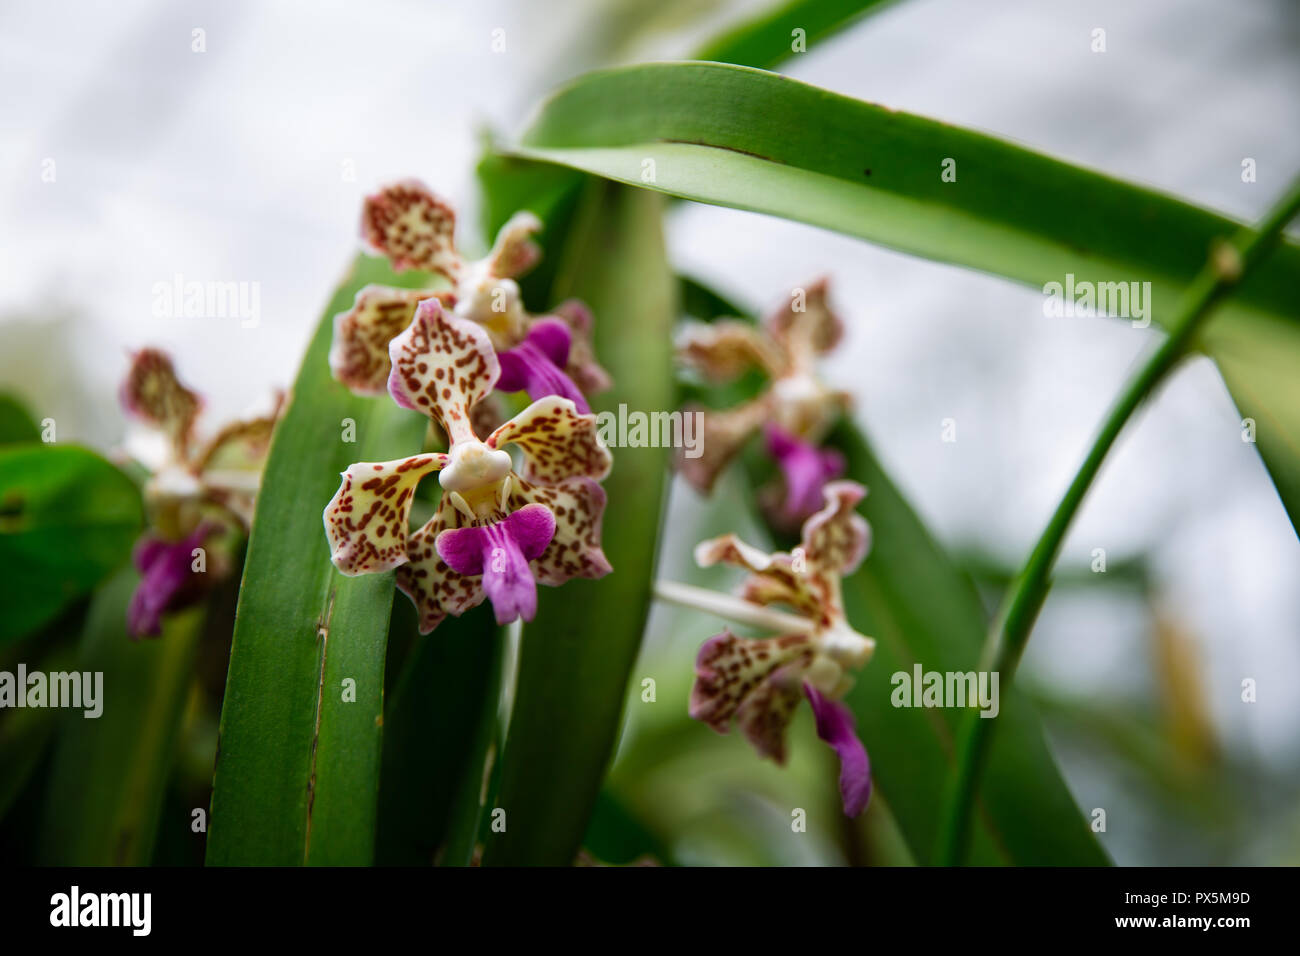 Zygopetalum Orchid in Lembang Indonesia with veining and spotting of chartreuse, maroon and purple Stock Photo